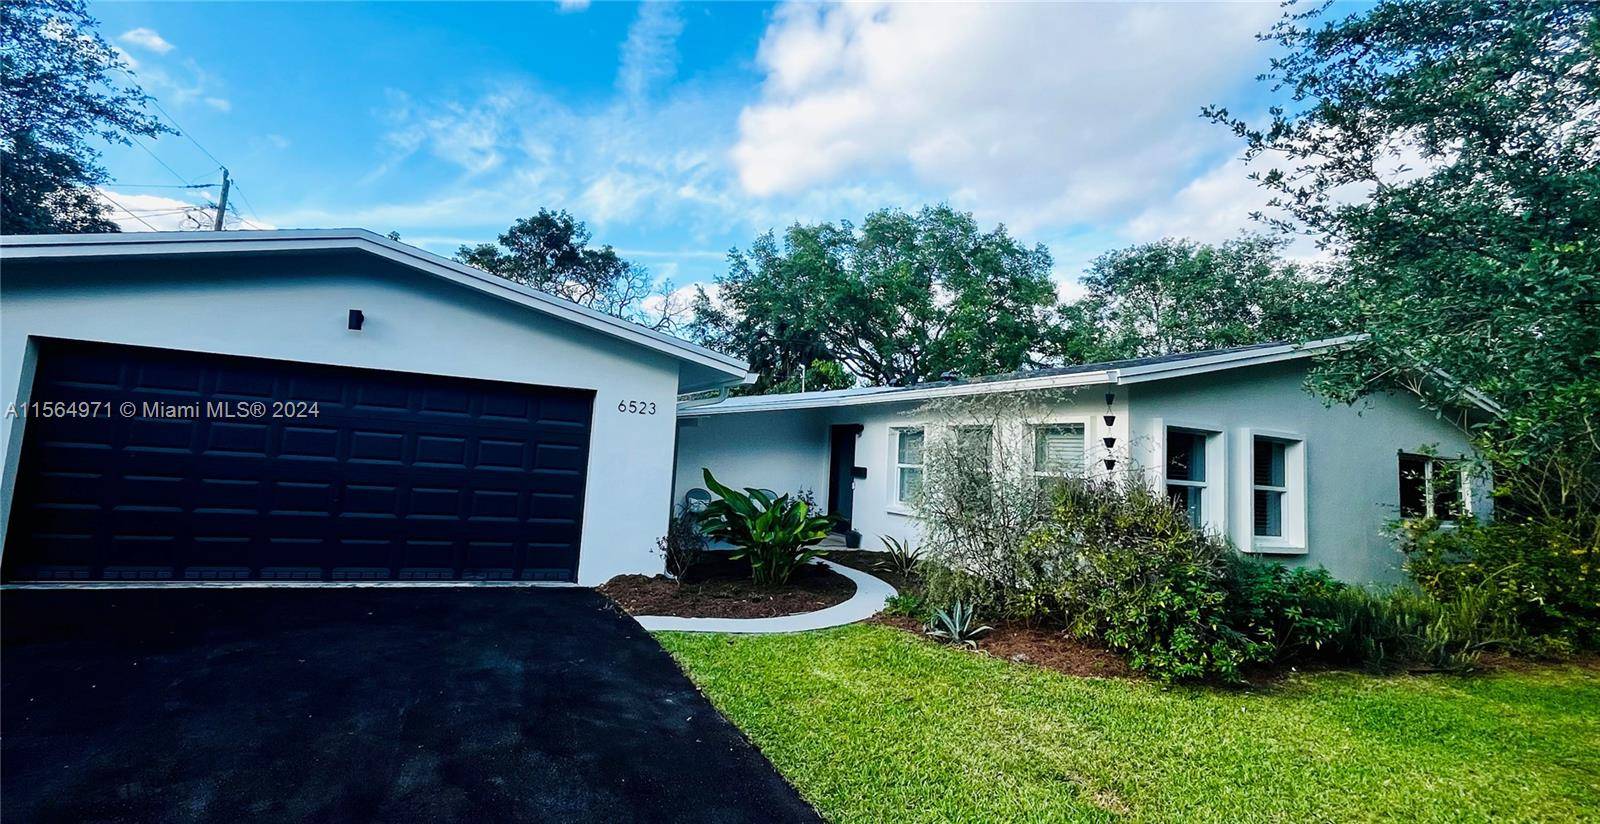 Renovated 3 bedroom, 2 bathroom family home situated on a prime corner lot in South Miami.